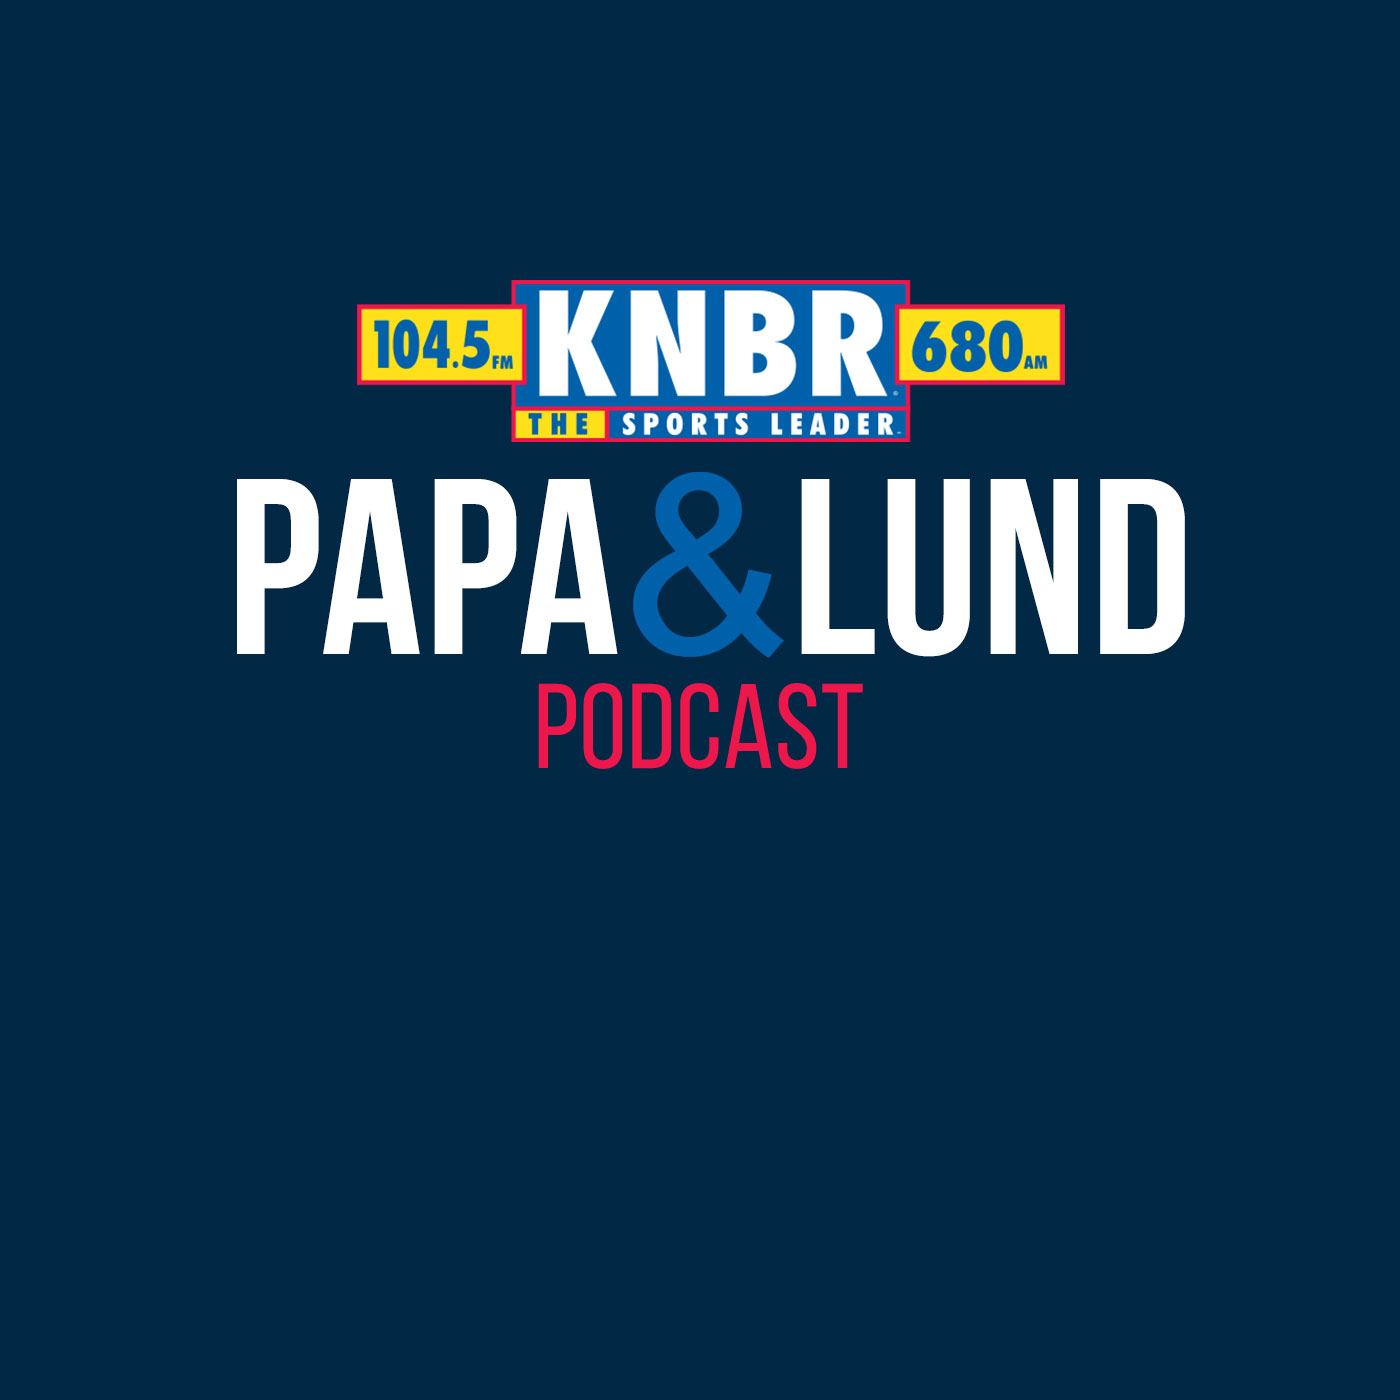 11-24 The Tim Ryan Bull Rush w/ Papa & Lund: How the 49ers can beat the Vikings this weekend